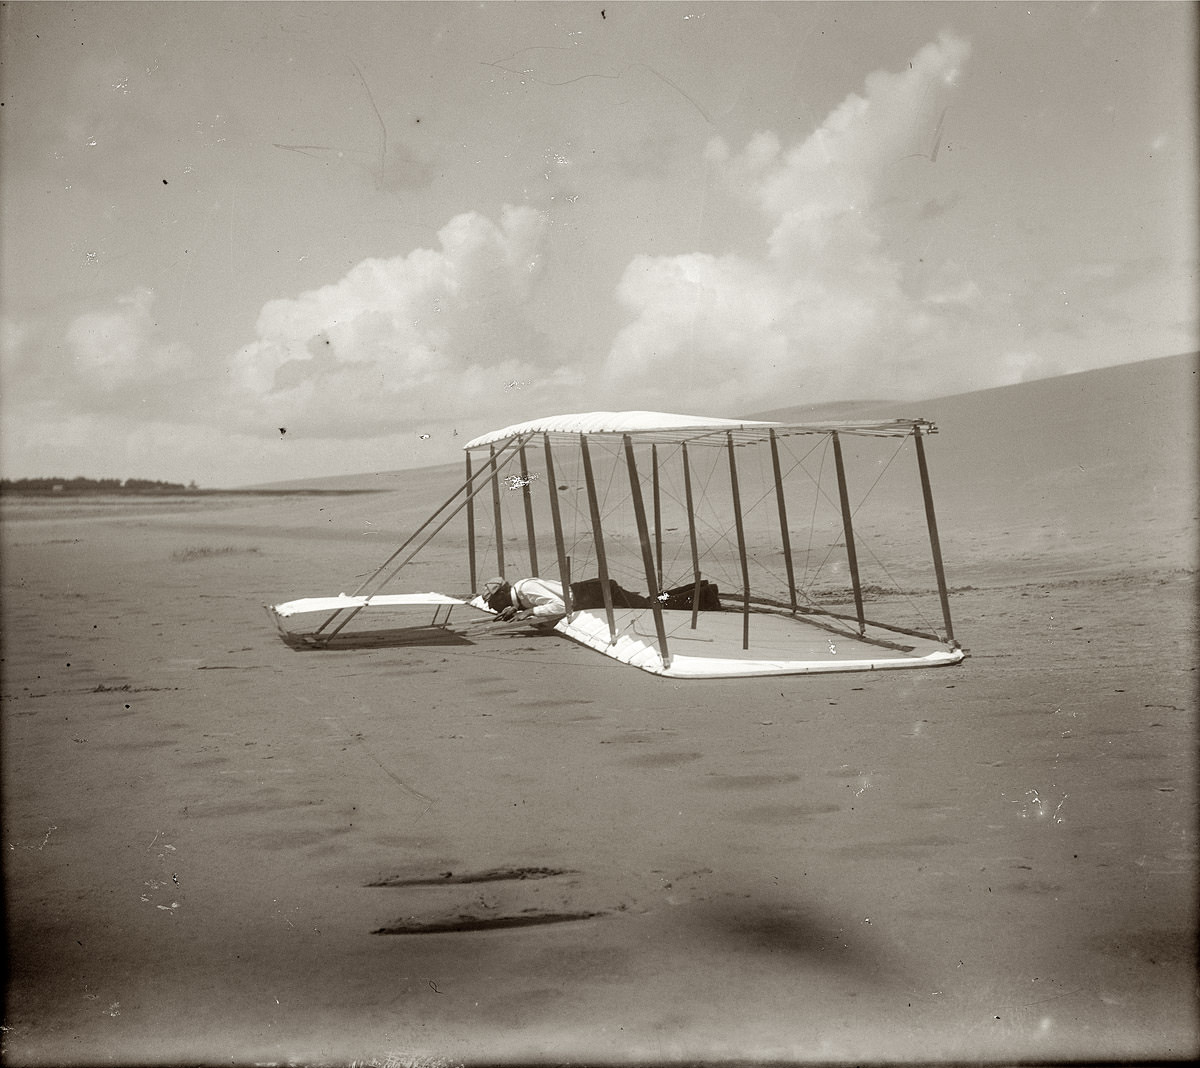 Kitty Hawk, North Carolina. Wilbur Wright and the glider just after landing, 1901.